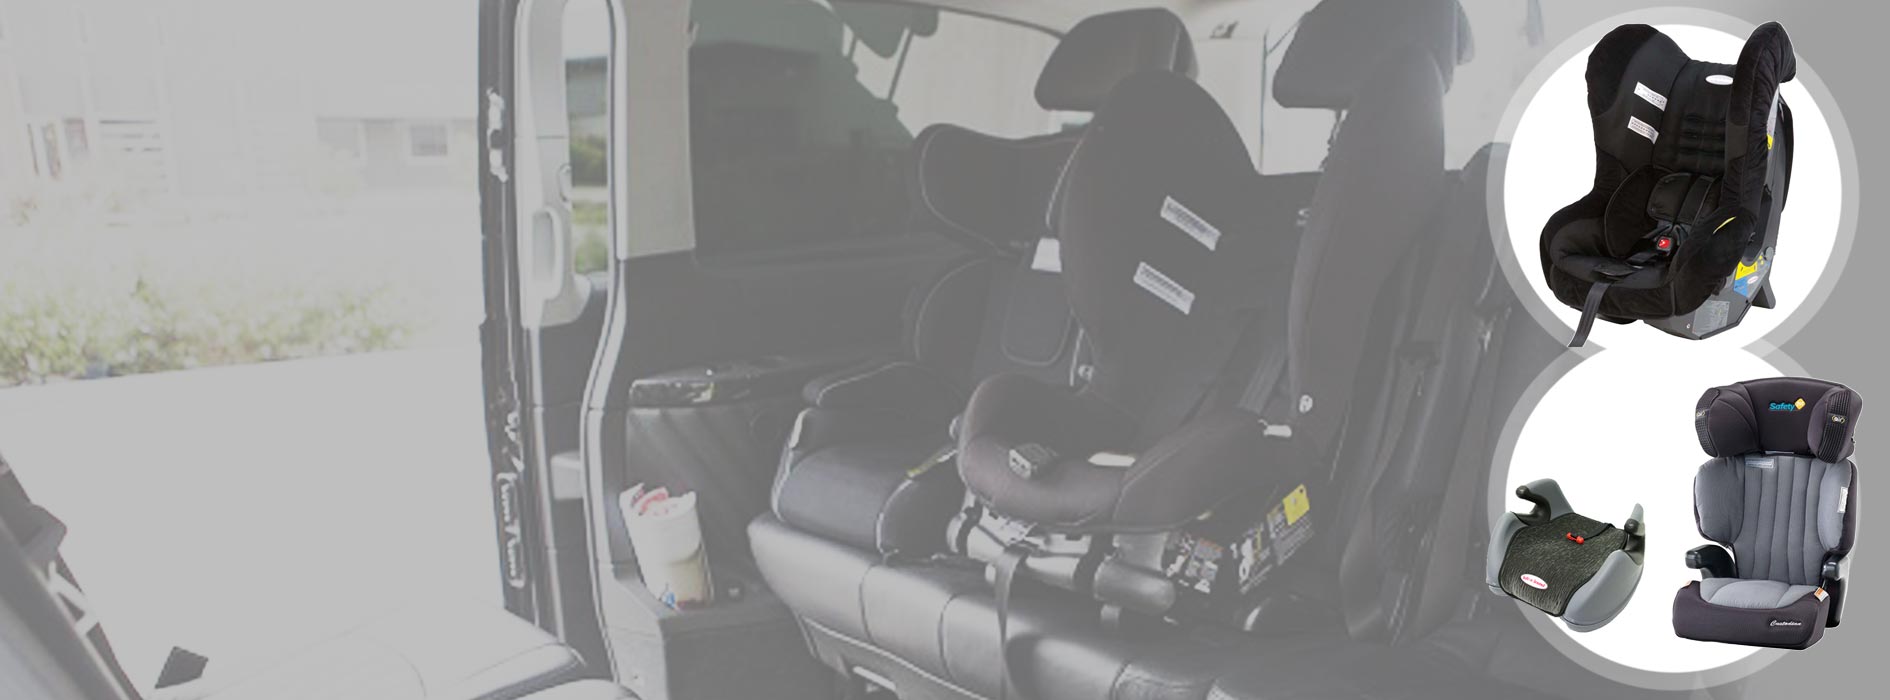 Taxi with baby seat Melbourne | Taxi with car seat Melbourne | Taxi Melbourne airport child seat